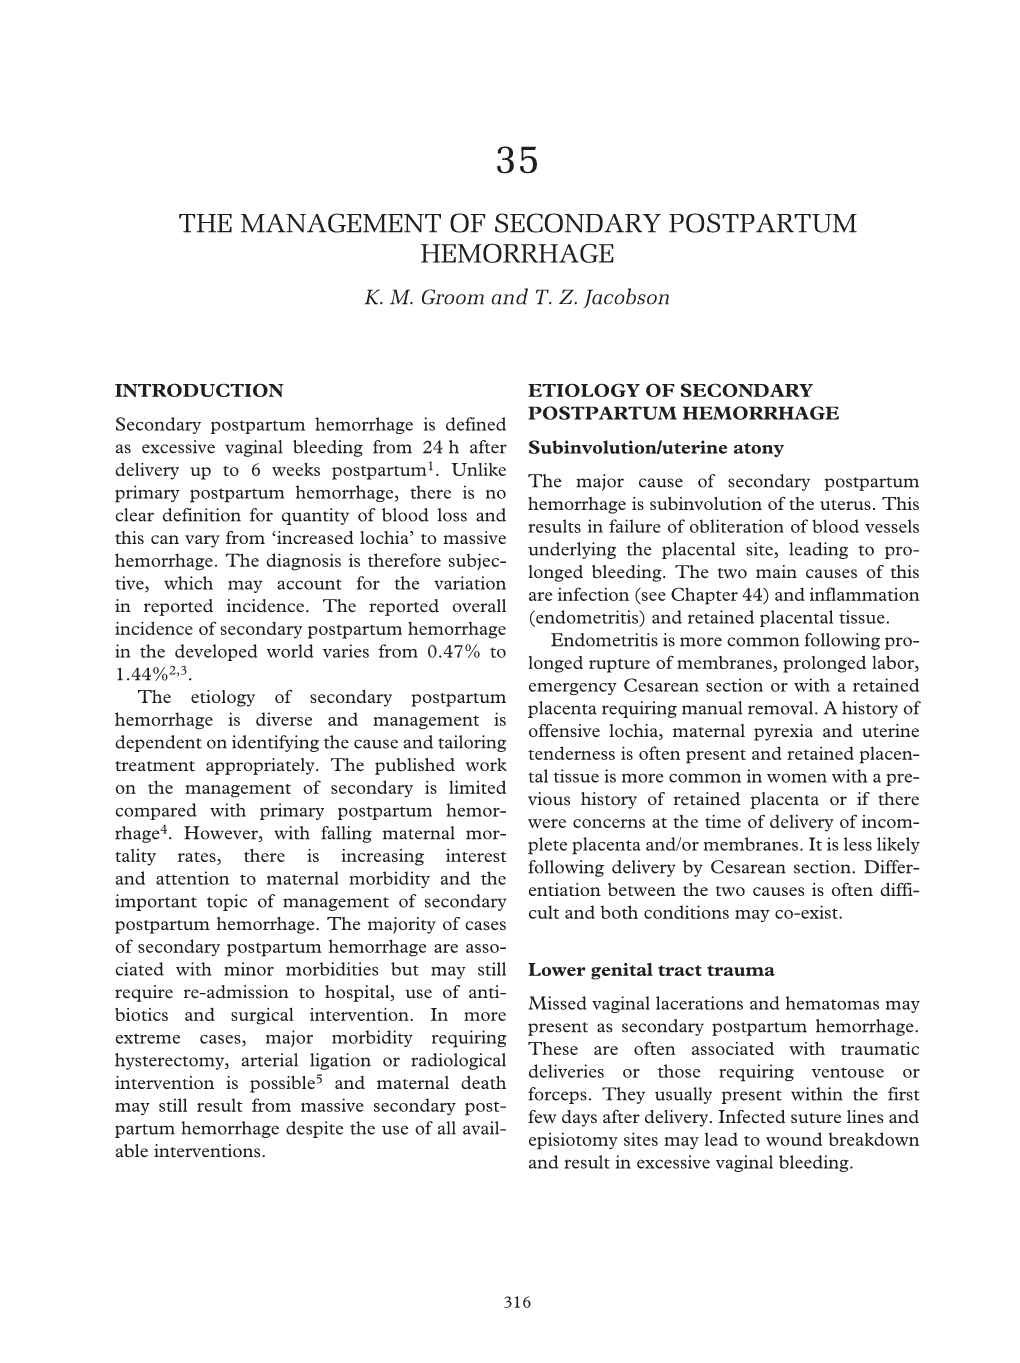 Chapter 35: the Management of Secondary Postpartum Hemorrhage